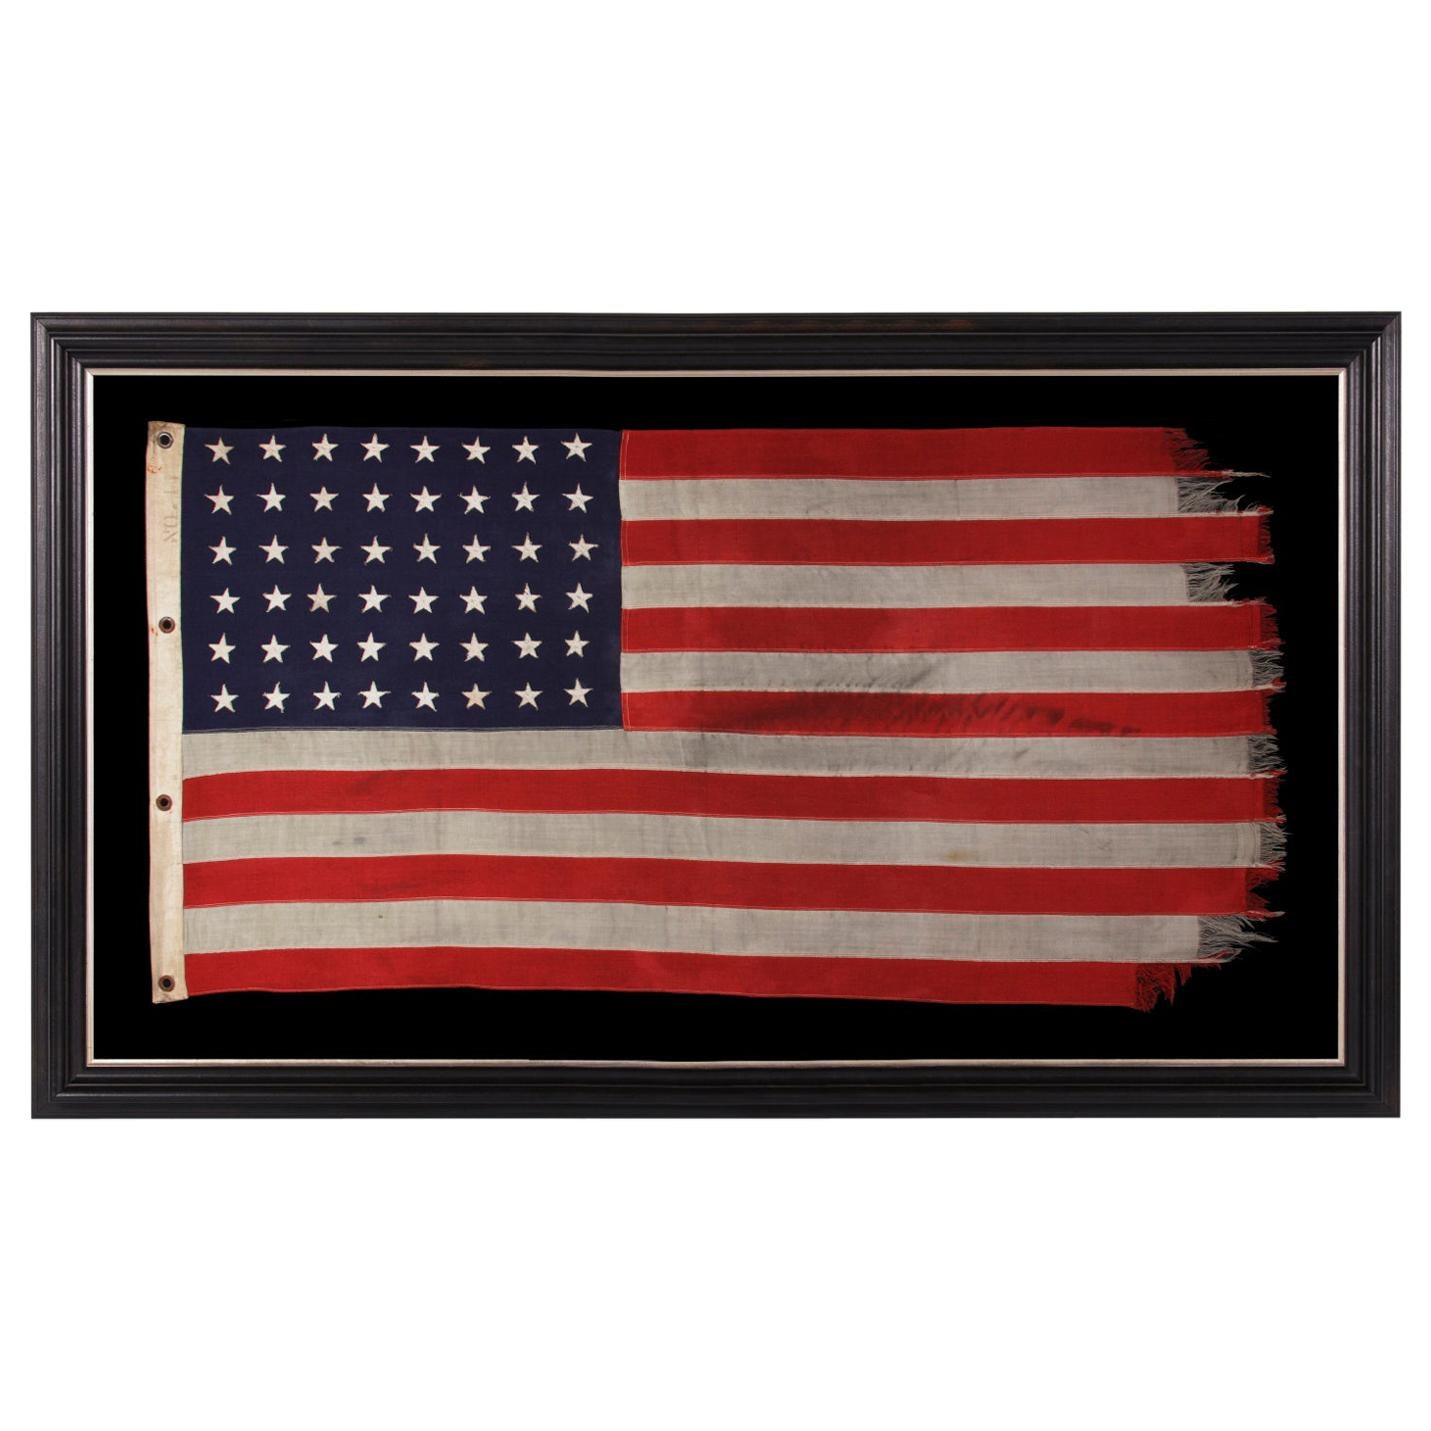 WWII American Flag with 48 Stars